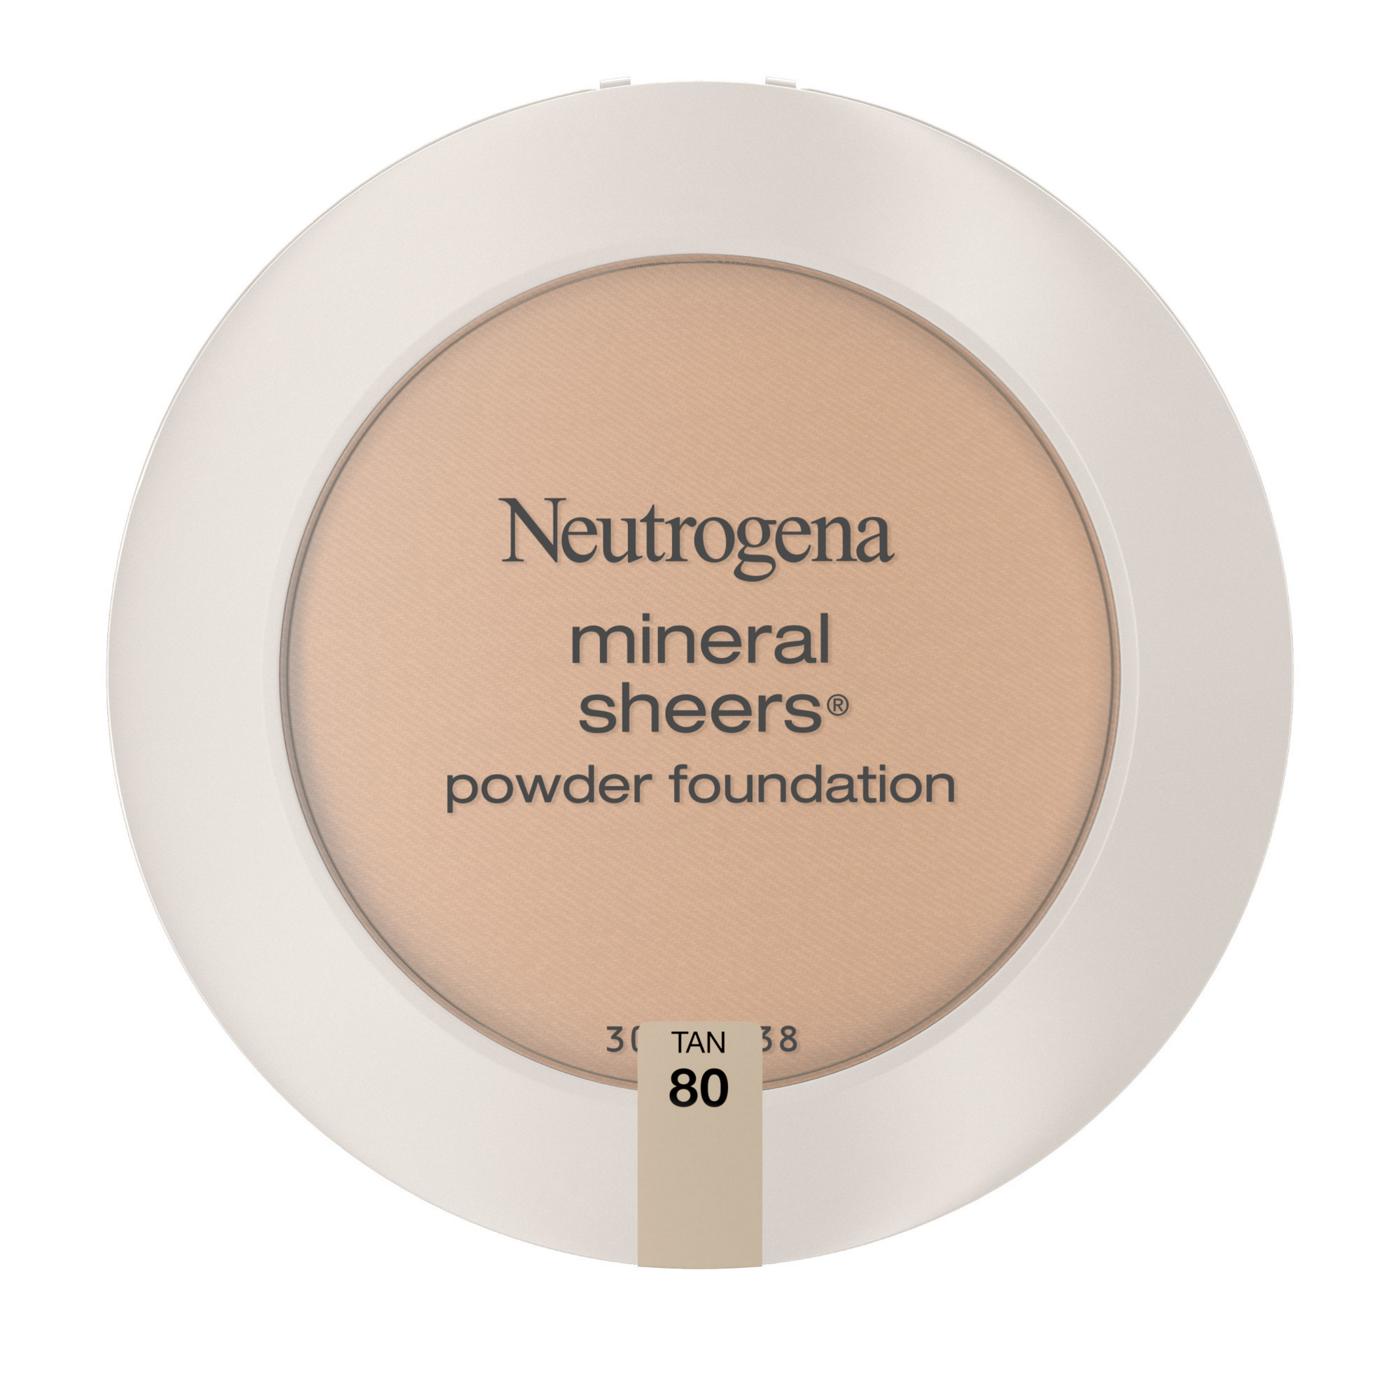 Neutrogena Mineral Sheers Compact Powder Foundation 80 Tan; image 1 of 6